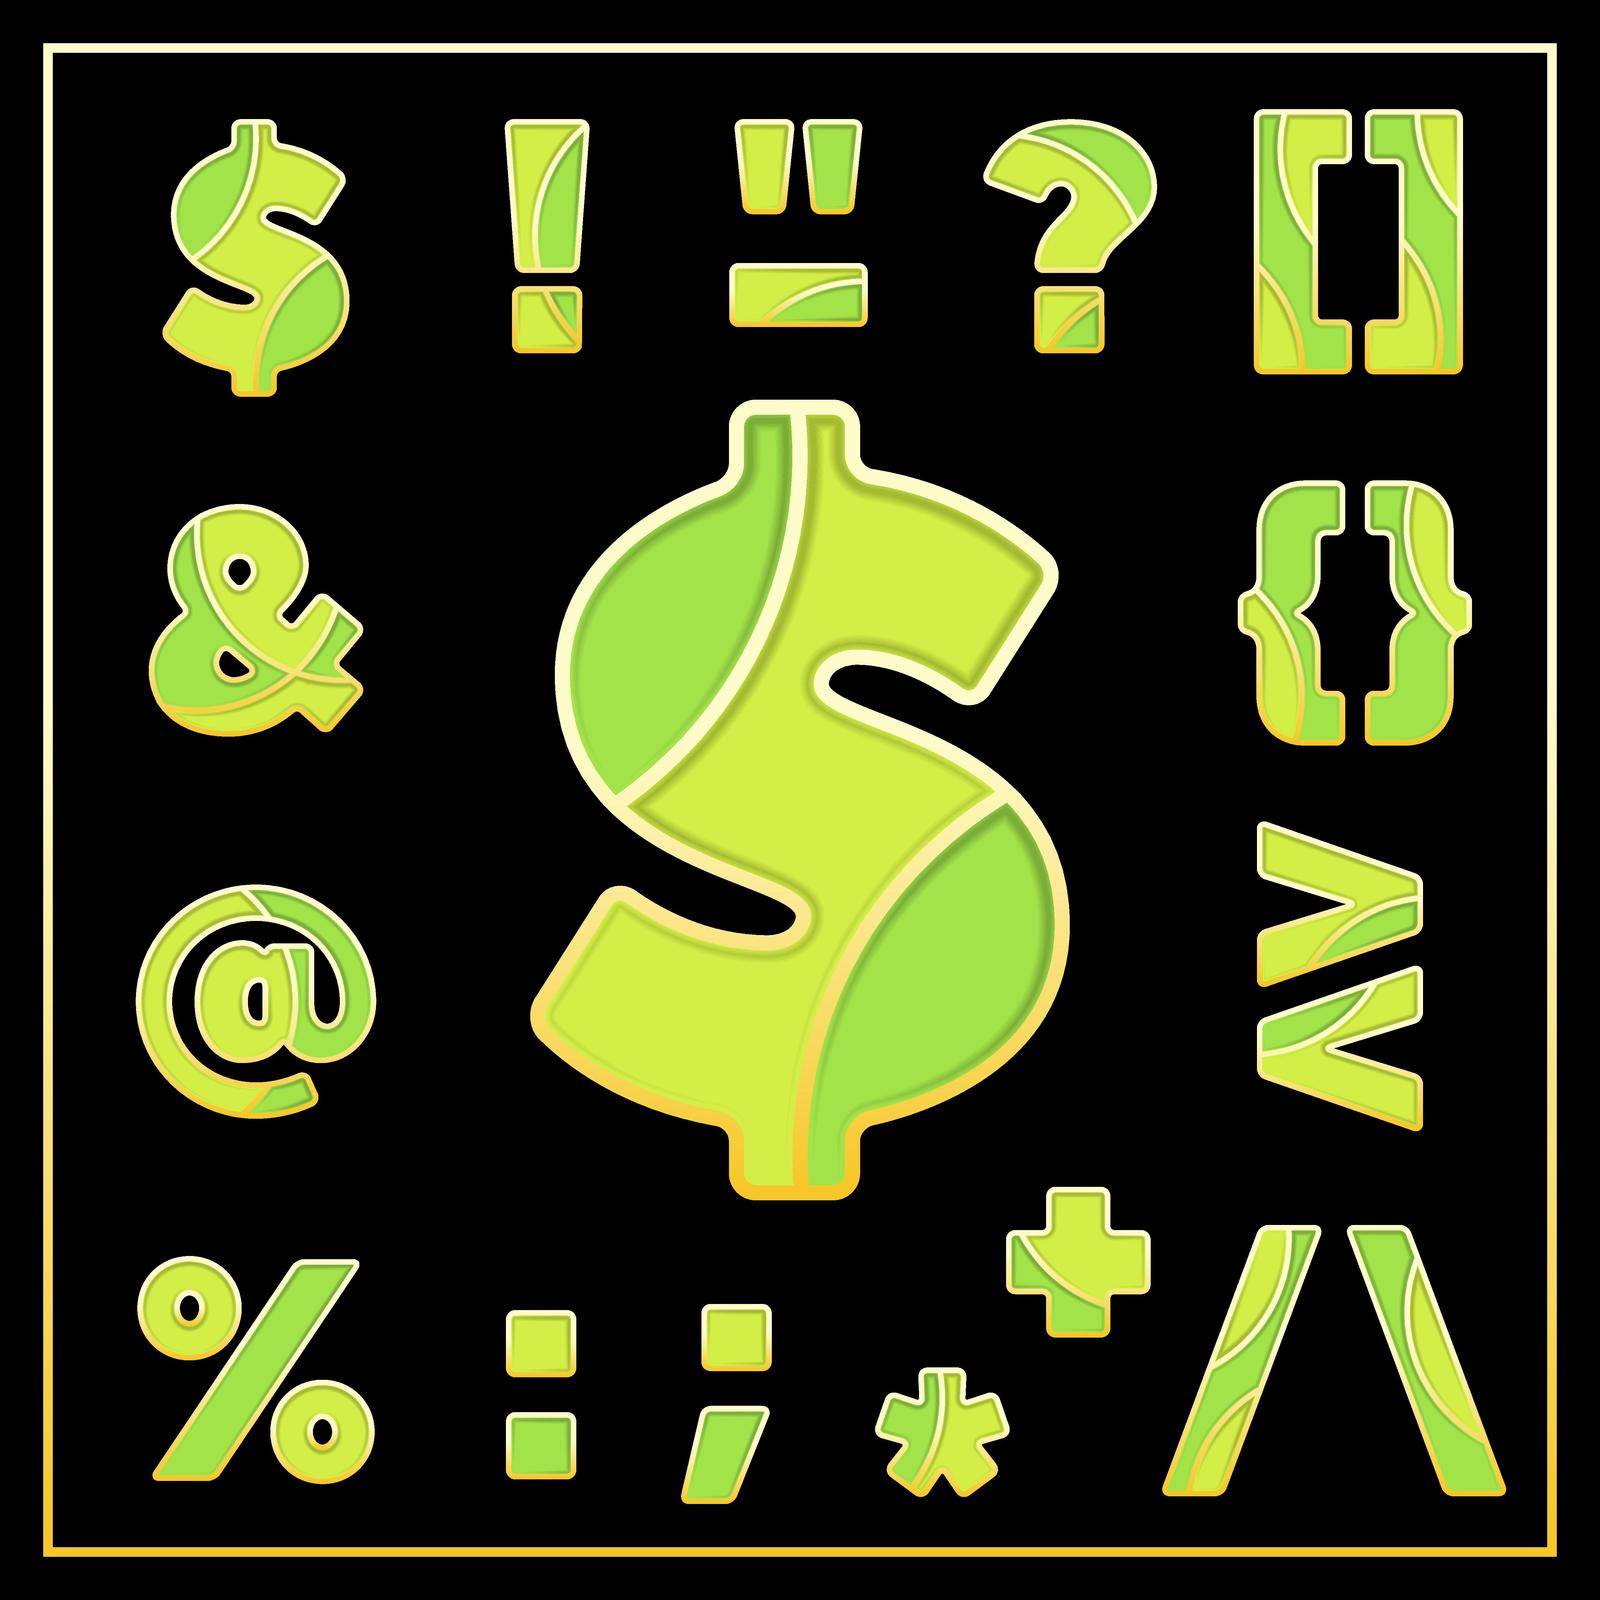 Colorful stylized mosaic font with punctuation marks. Part 4 of 4. Enamel jewelry art isolated symbols in green colors. Dollar sign, exclamation mark, percent sign and others for elegant design.